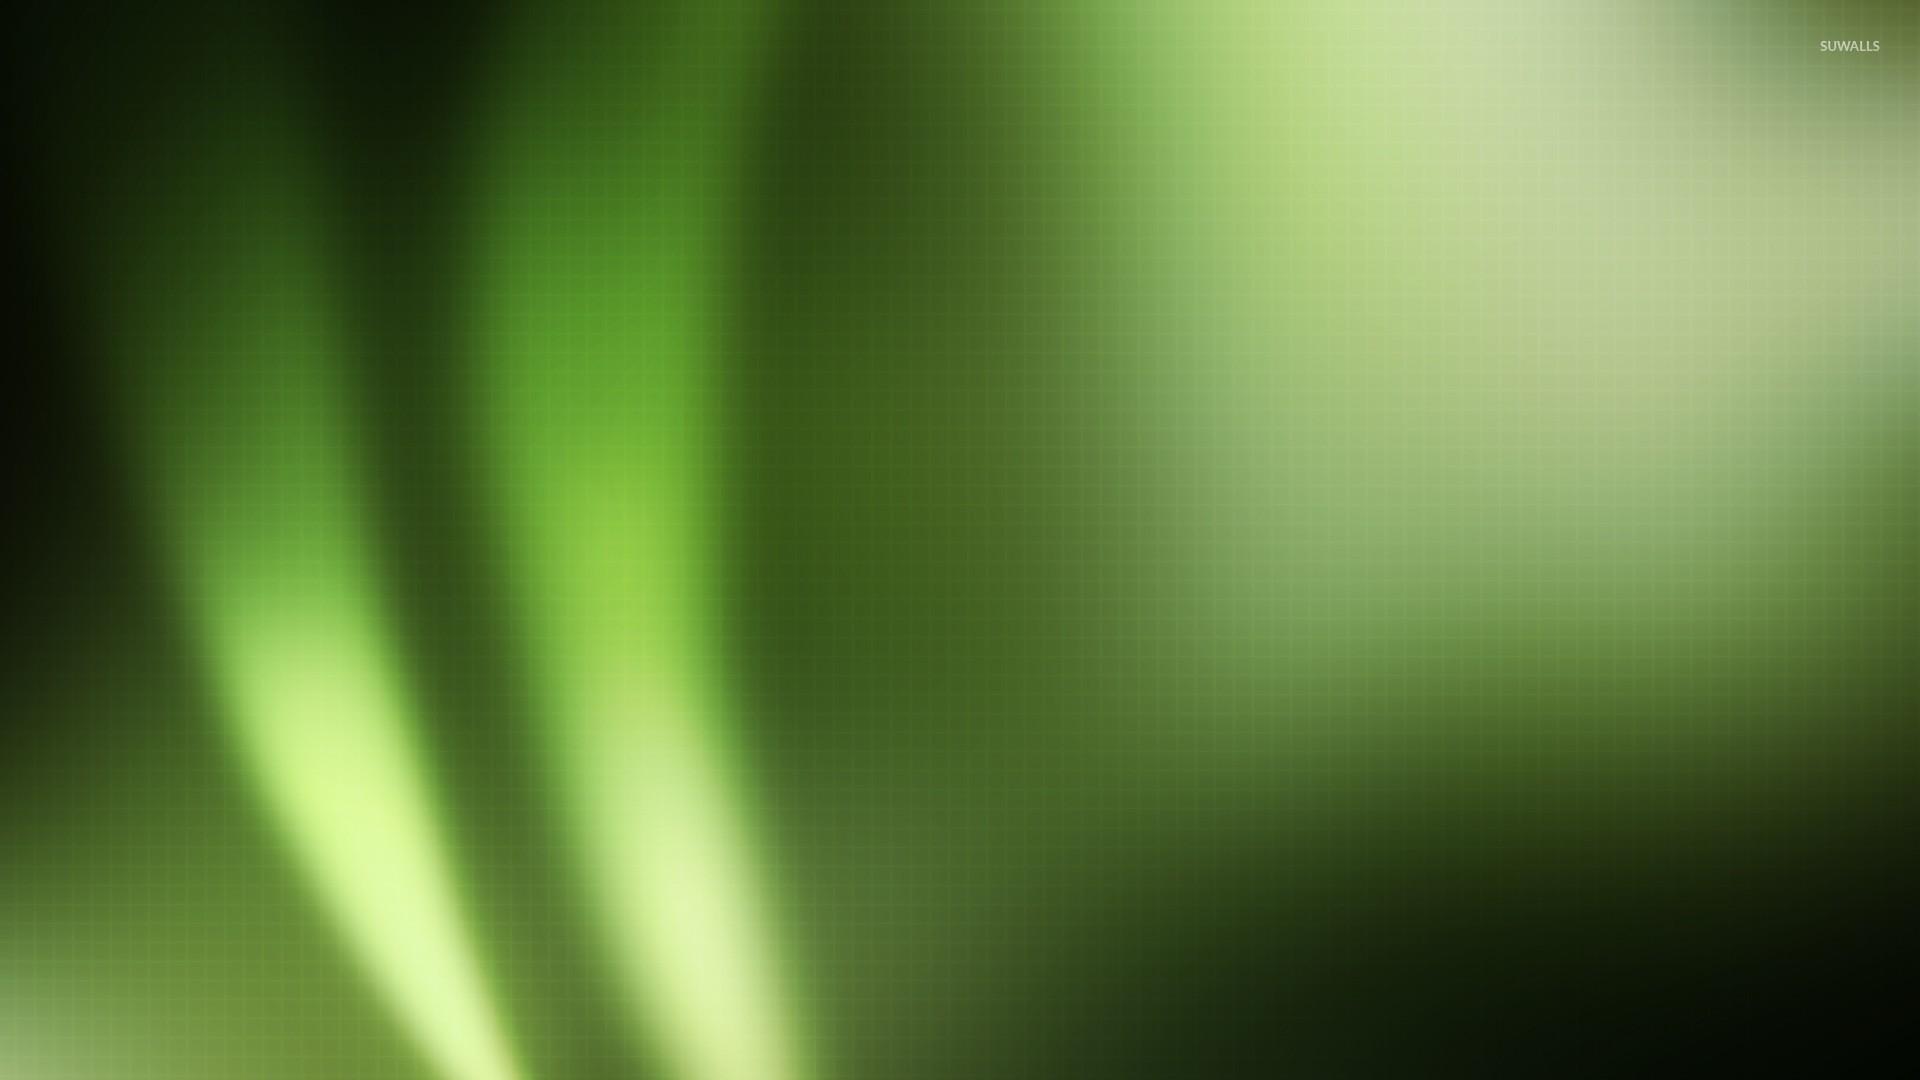 Light flares on green square pattern wallpapers